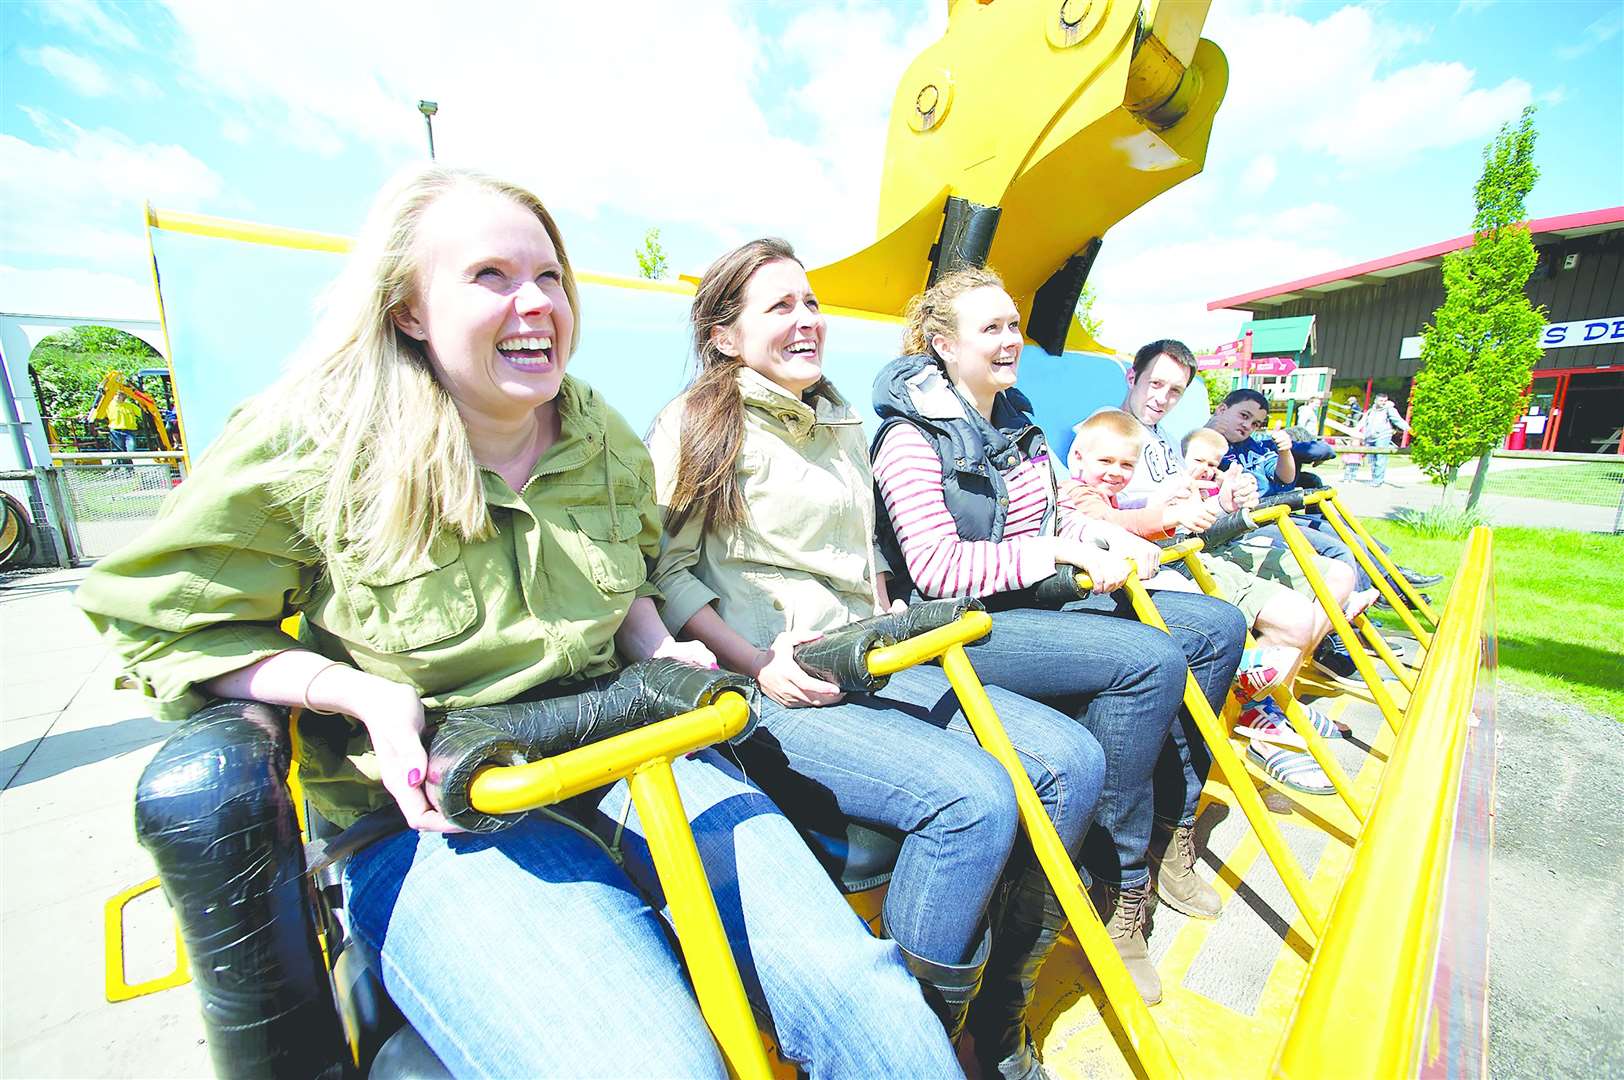 There are a variety of rides at Diggerland